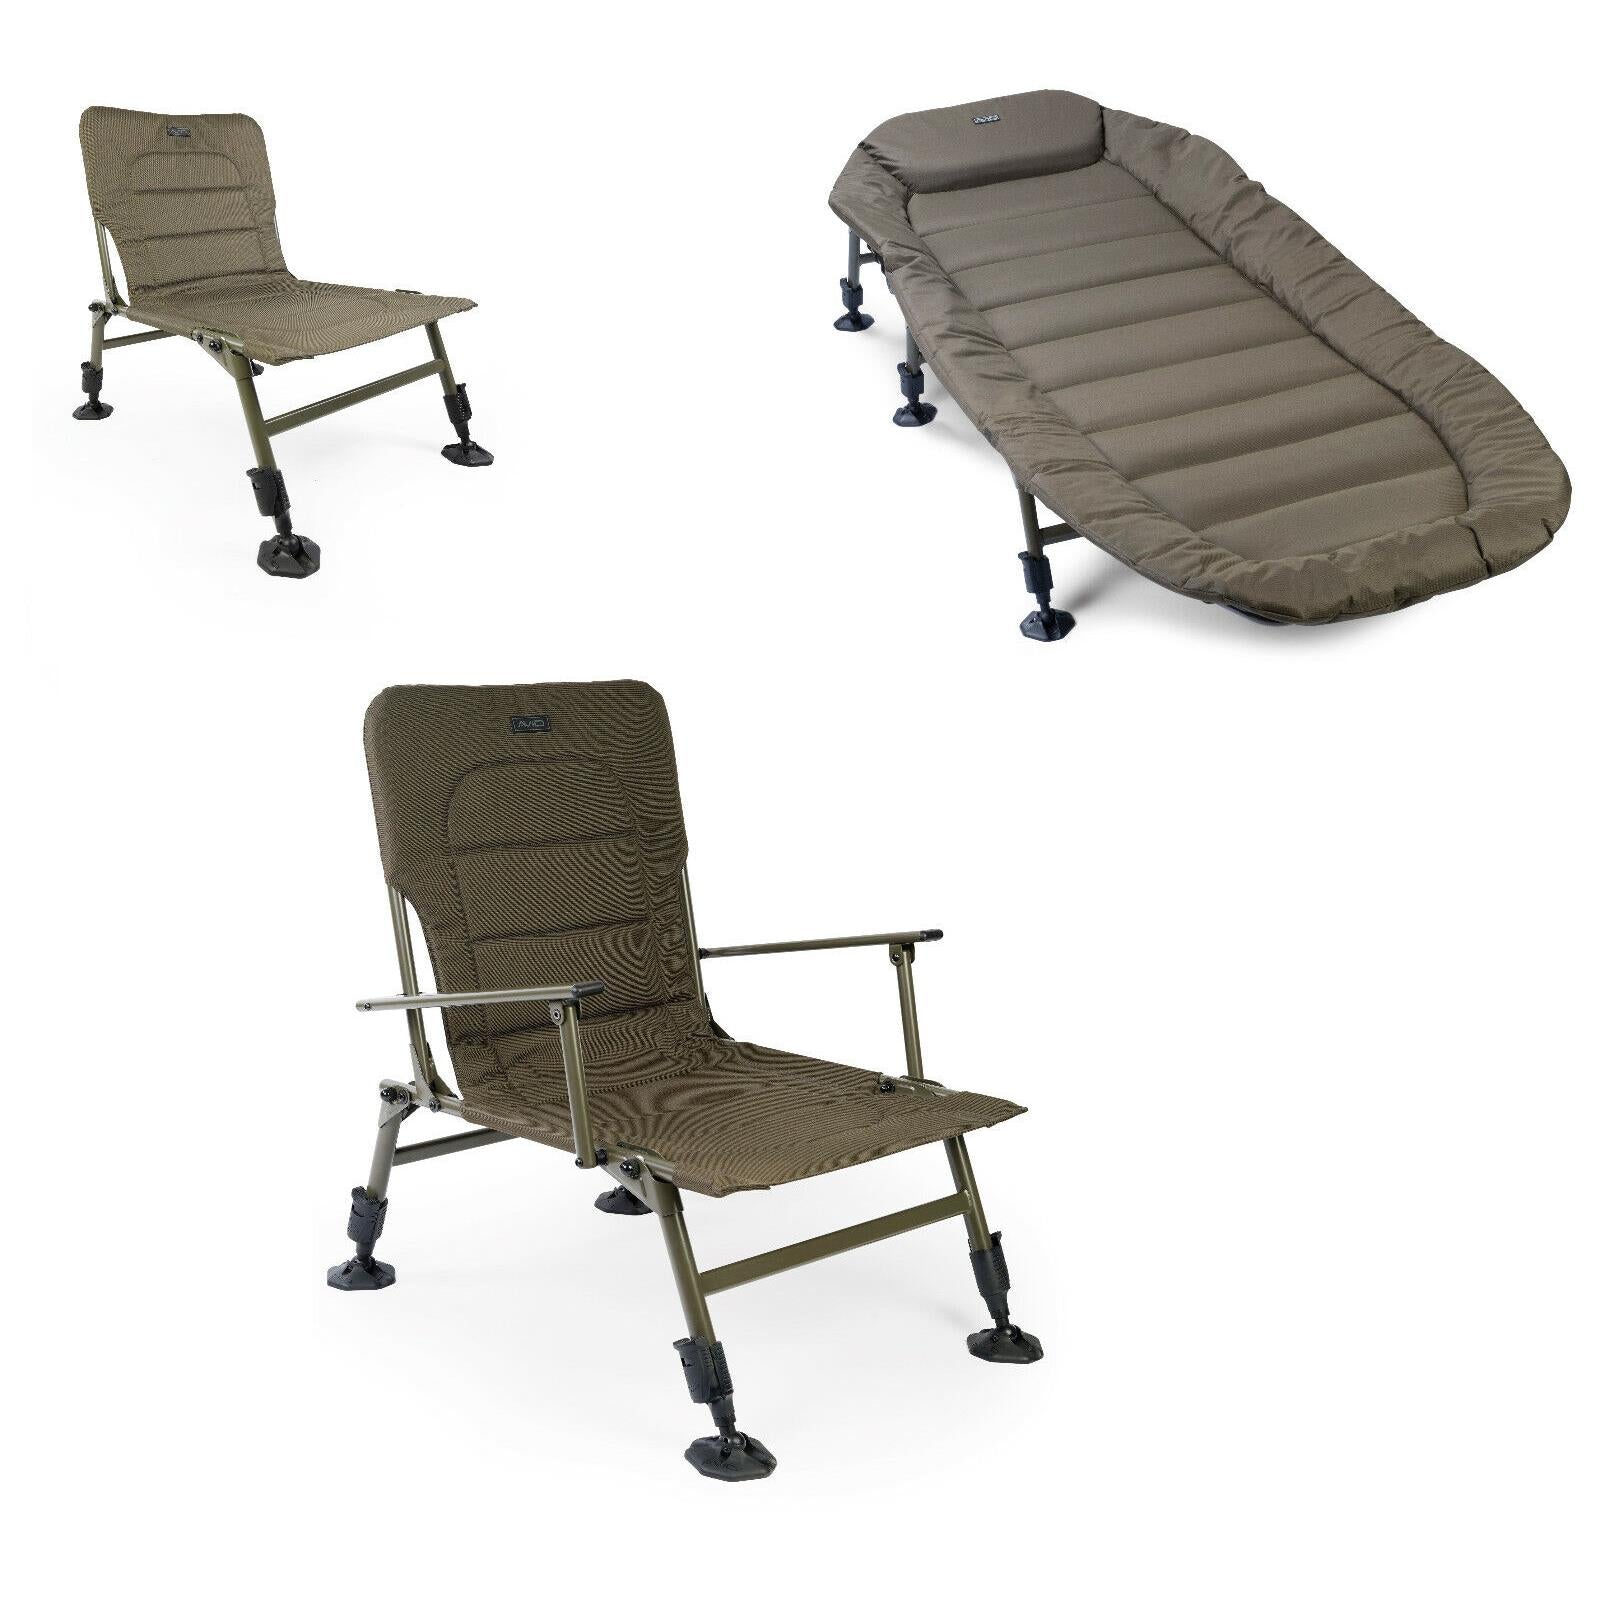 Avid Carp Ascent Range Day Chair Recliner Bed Arm Chair Carp